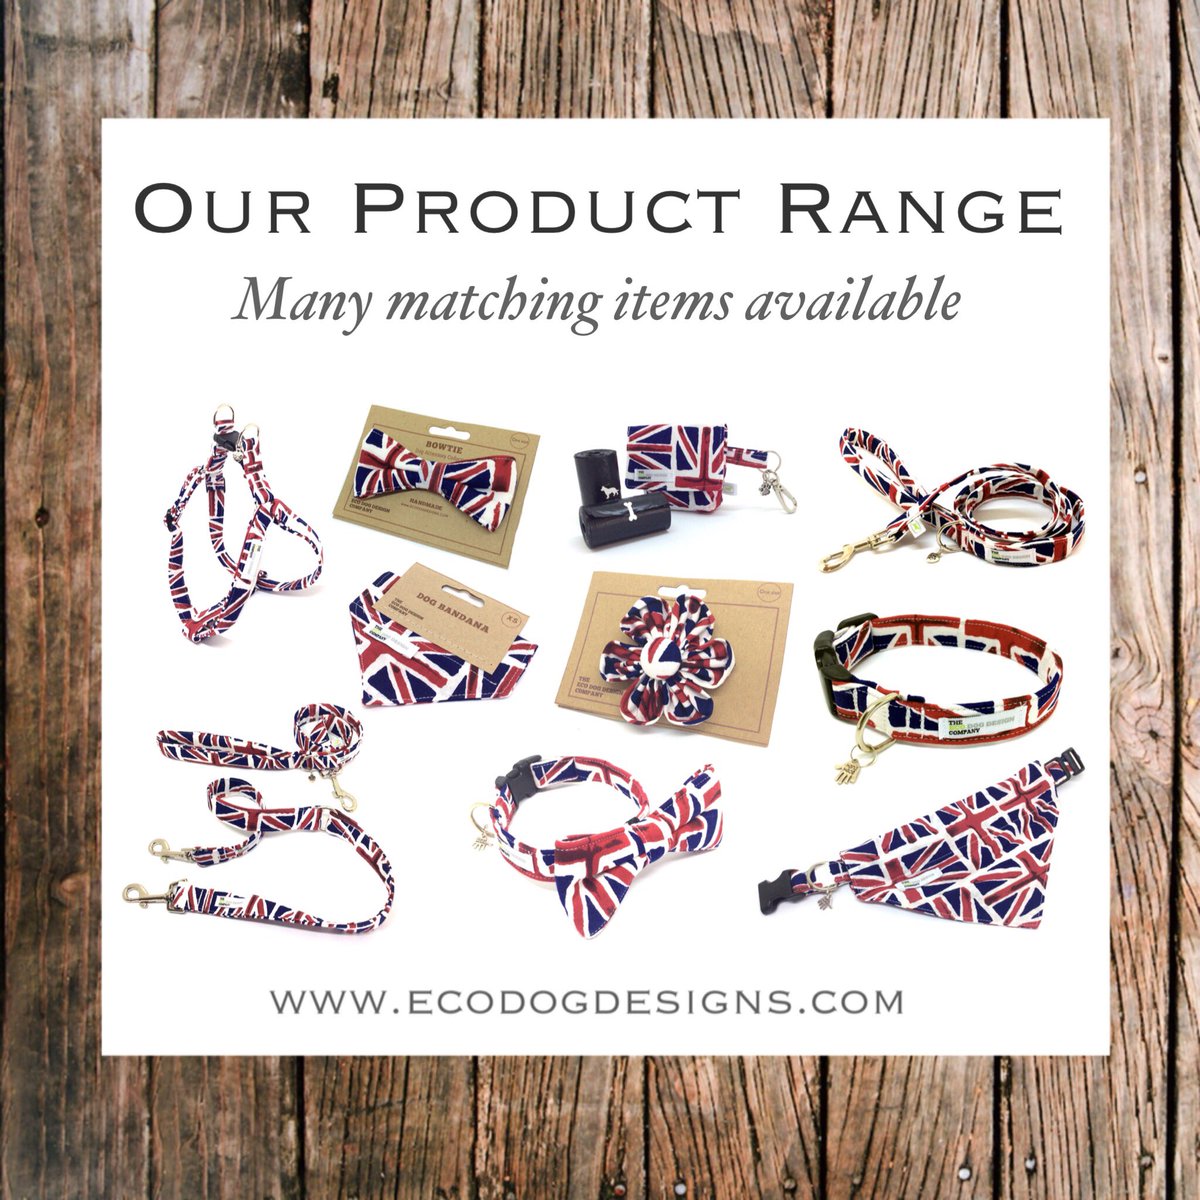 ⭐️  O U R   P R O D U C T   R A N G E ⭐️
Along with our very popular Collars and Leads, here’s a small list of the things we can do for you.
🐾 Harnesses
🐾 Flowers
🐾 Bow Ties
🐾 Bandanas
🐾 Lead Couplers
🐾 Poo Bag Holder
#productrange #doggygifts #dogshopping #matching